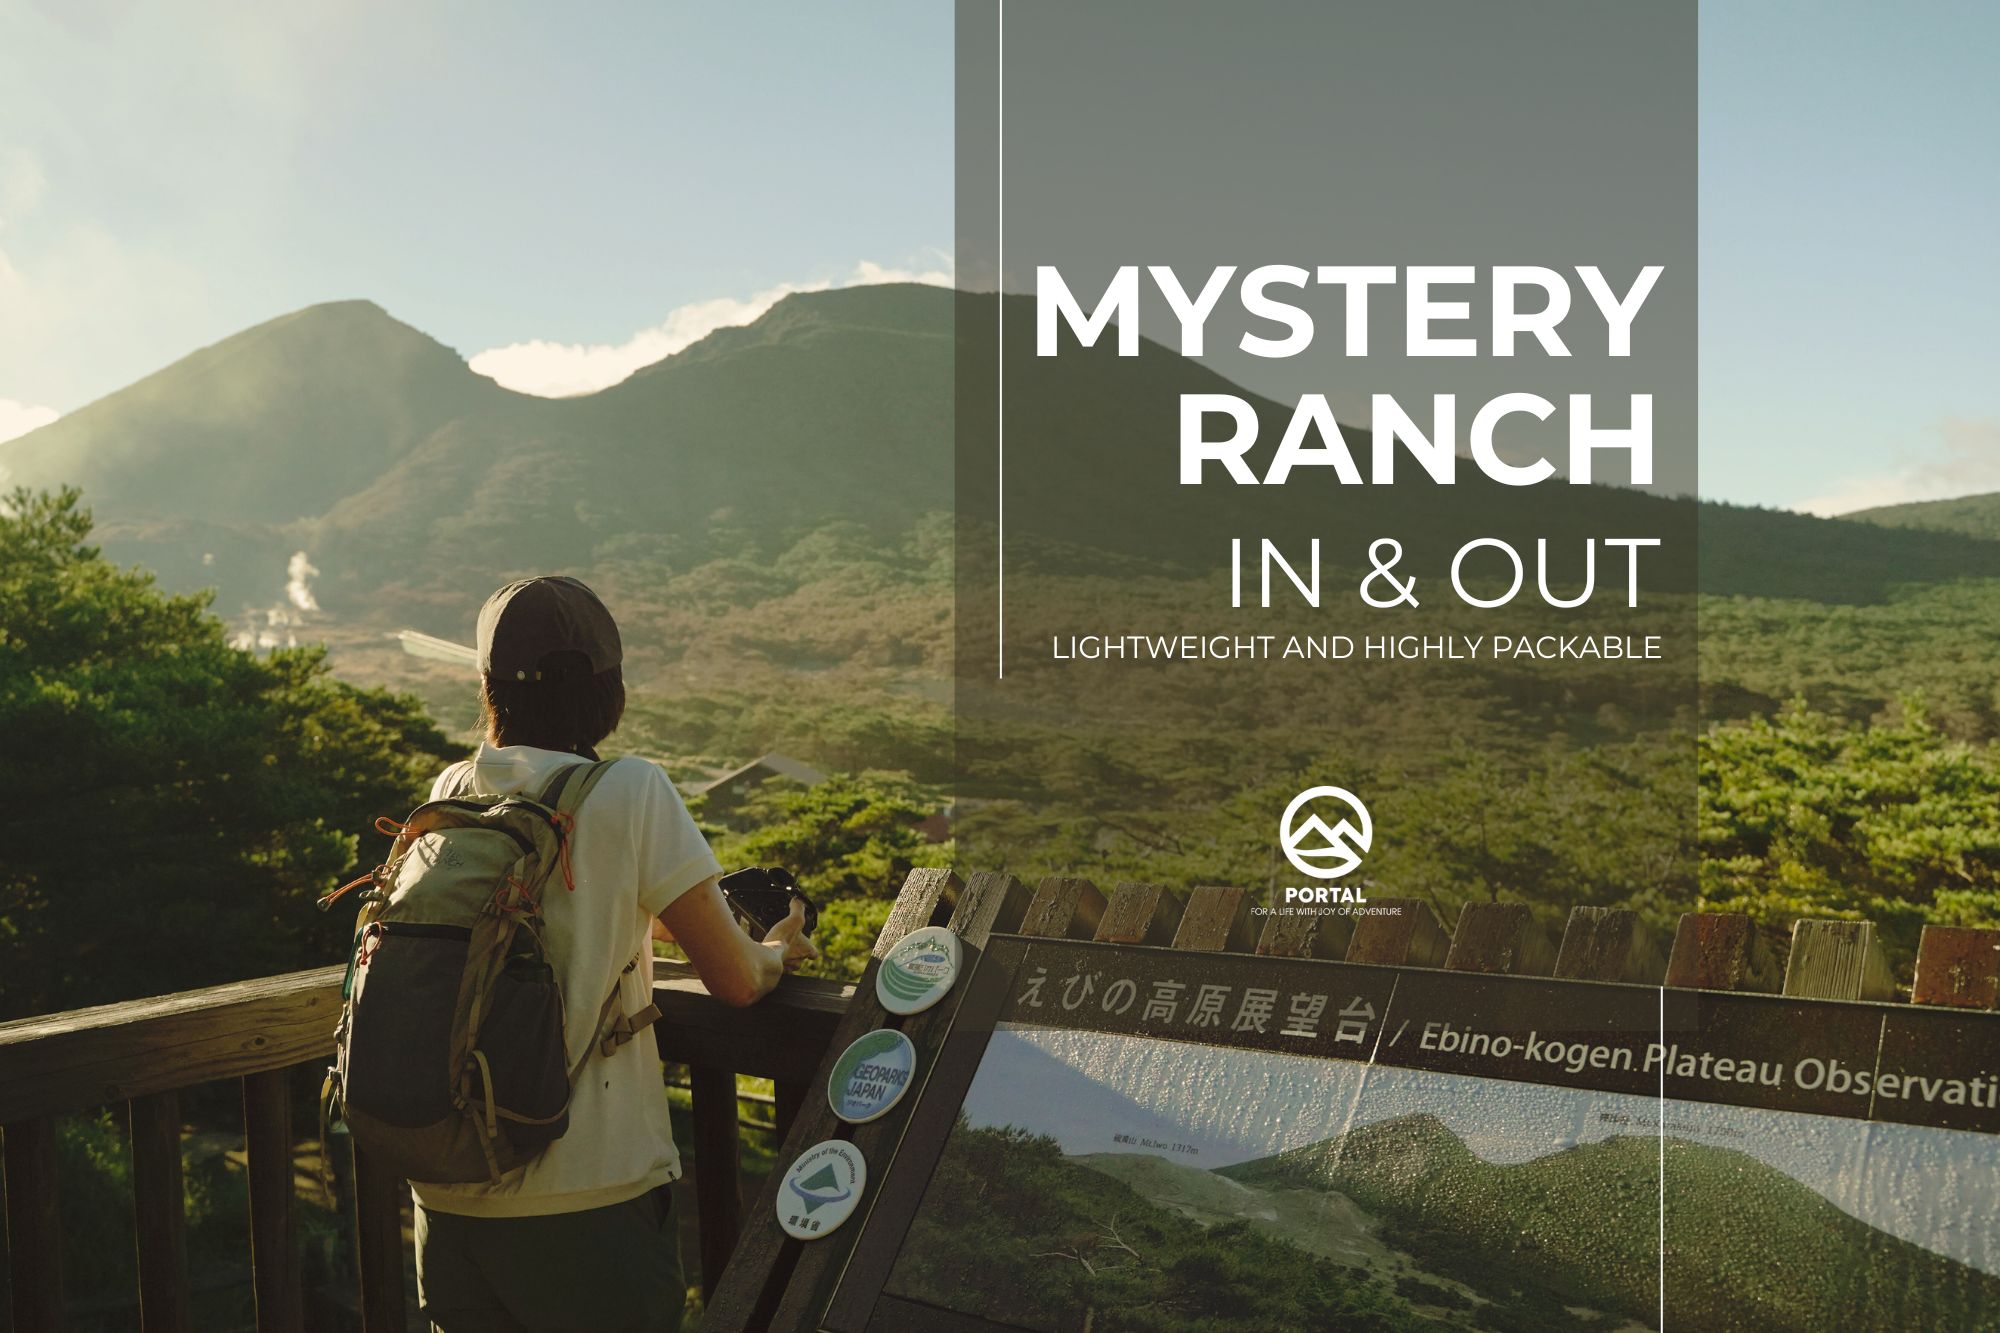 MYSTERY RANCH "IN & OUT"